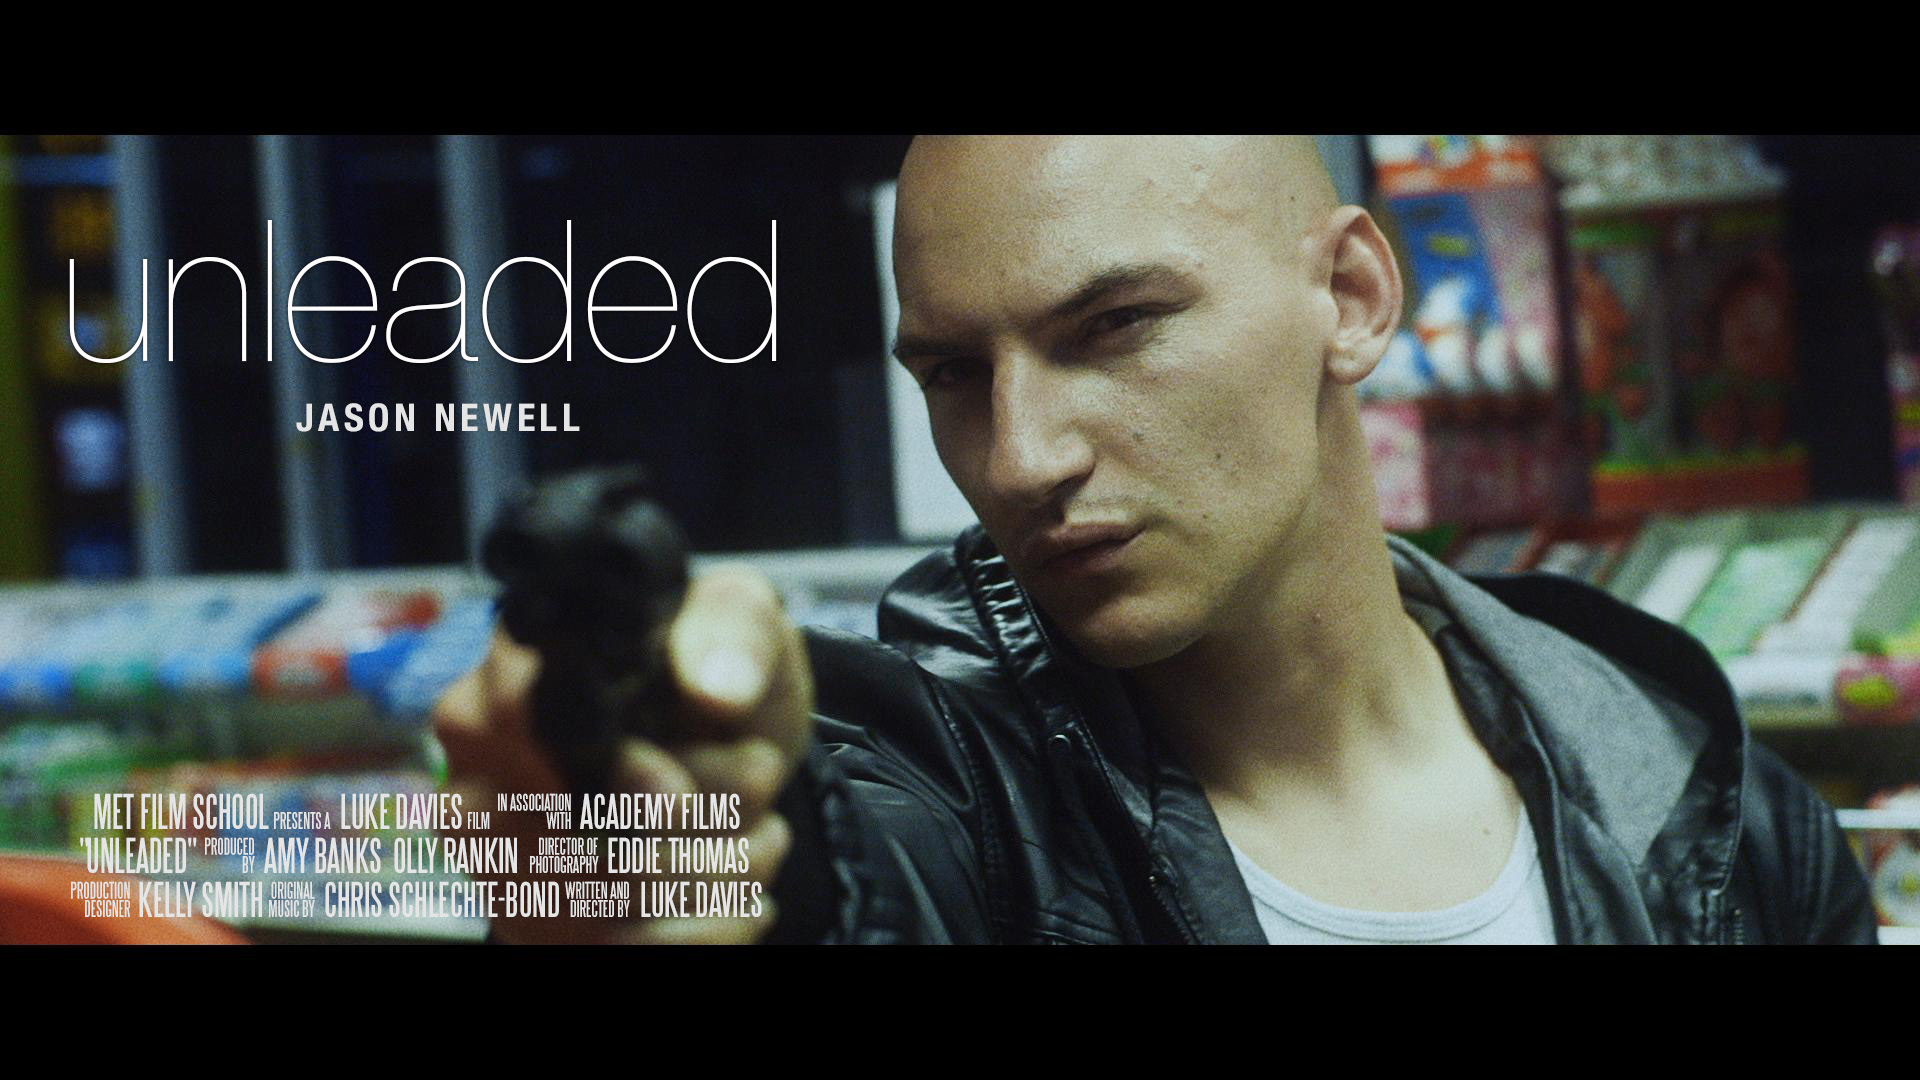 Exciting times for Unleaded - after winning the 'Audience Award' at Watersprite Festival, we've just heard that the film has been accepted into The Seattle International Film Festival 2015! Who knows, that Oscar nomination could be around